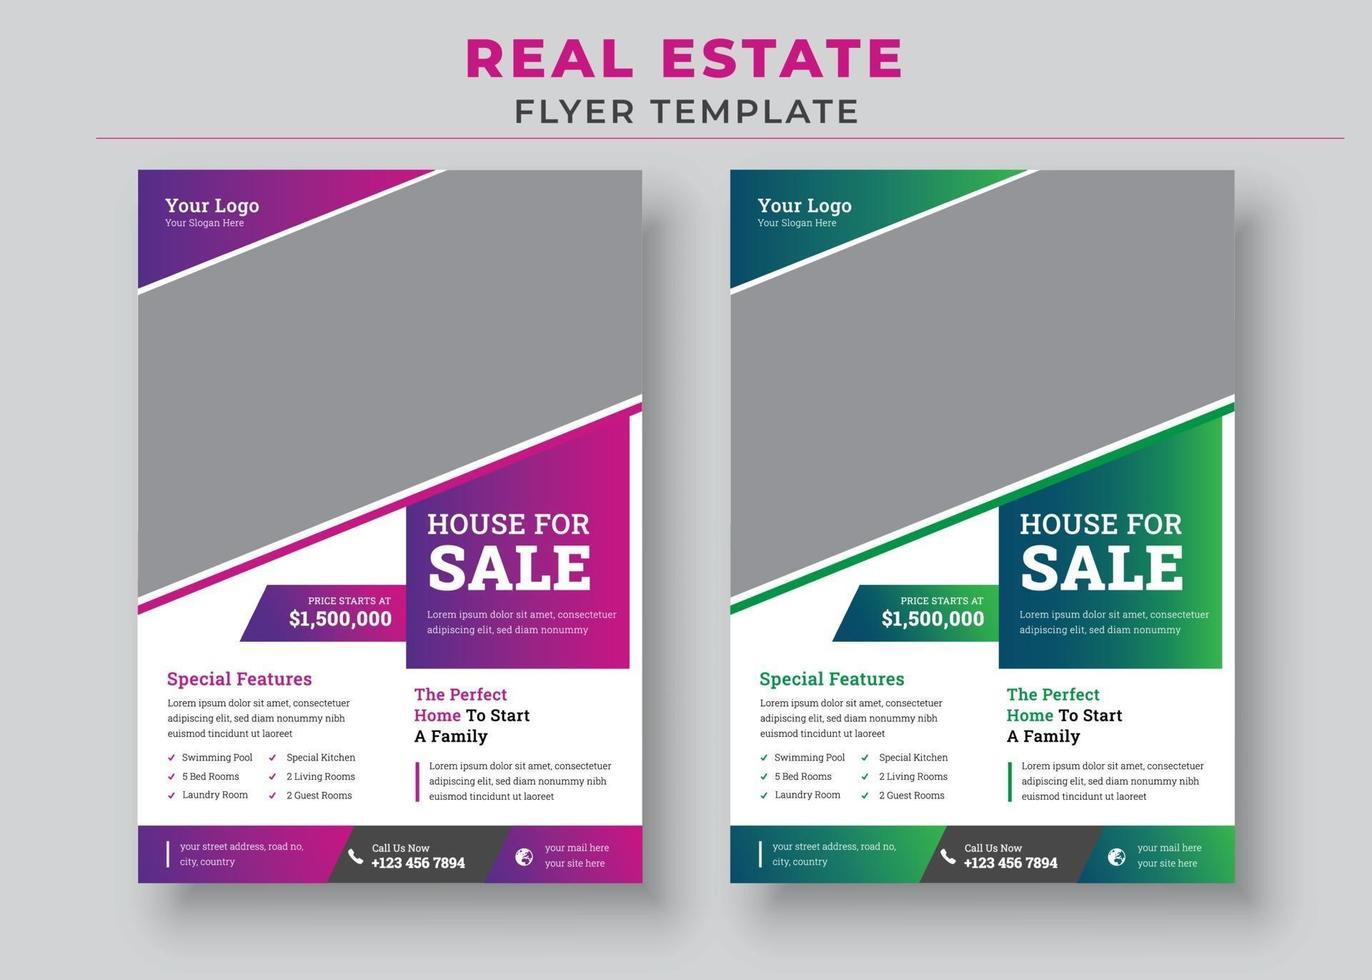 Real Estate Flyer Template, House for sale poster vector